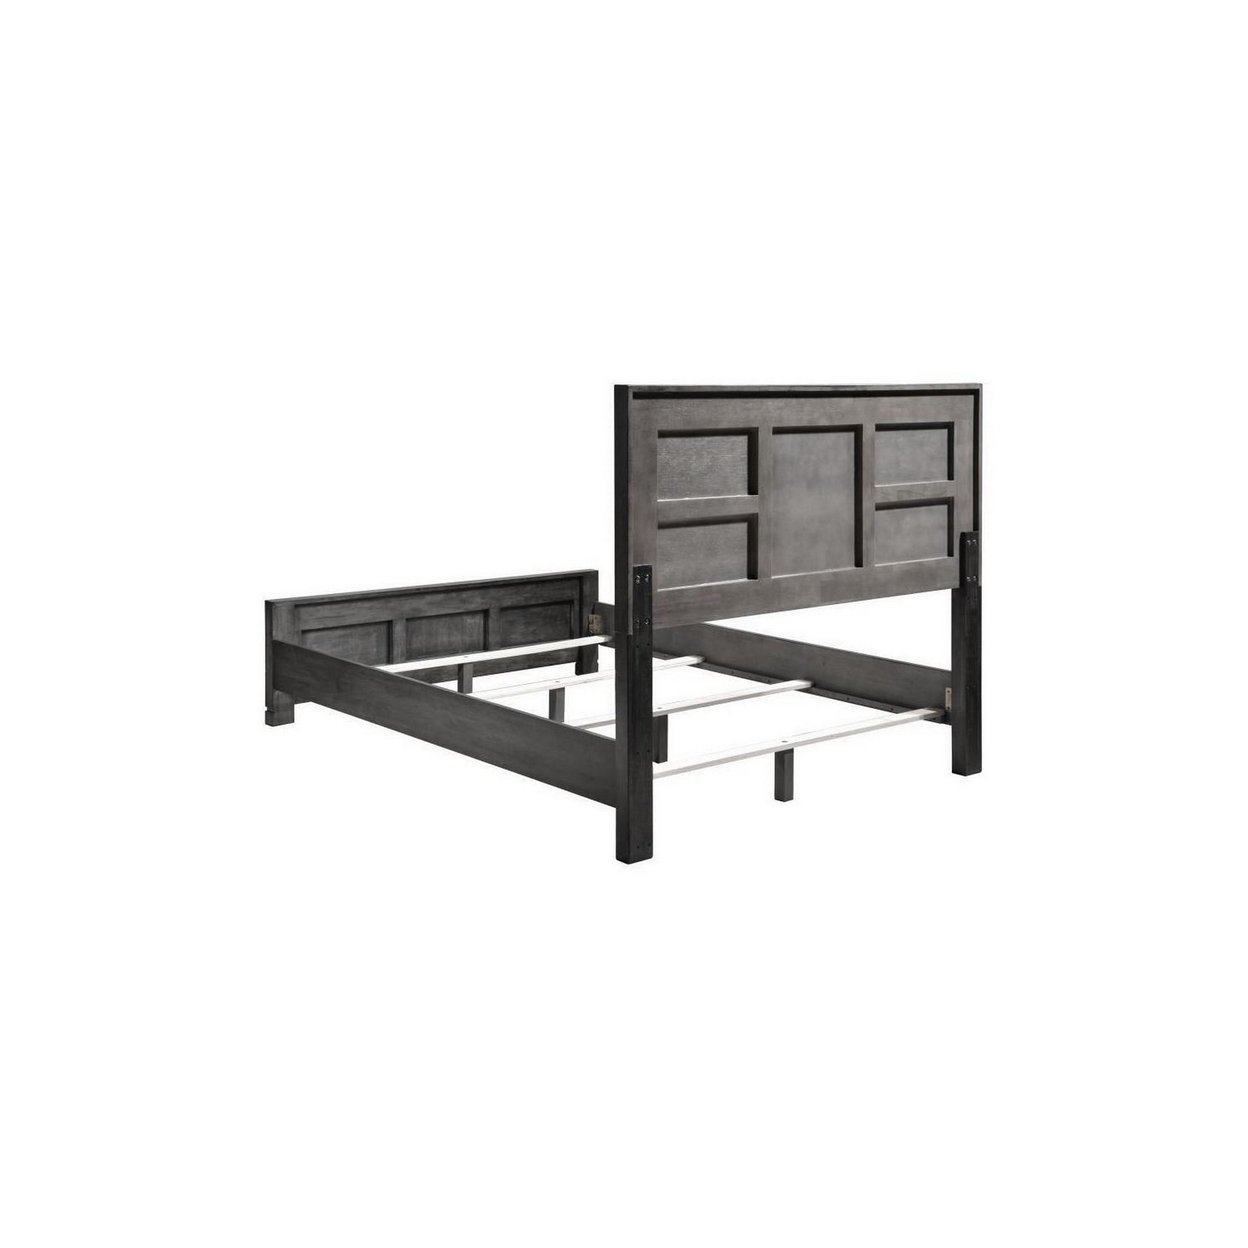 Acy Queen Bed, Panel Sections On Headboard And Footboard, Dark Gray Wood- Saltoro Sherpi